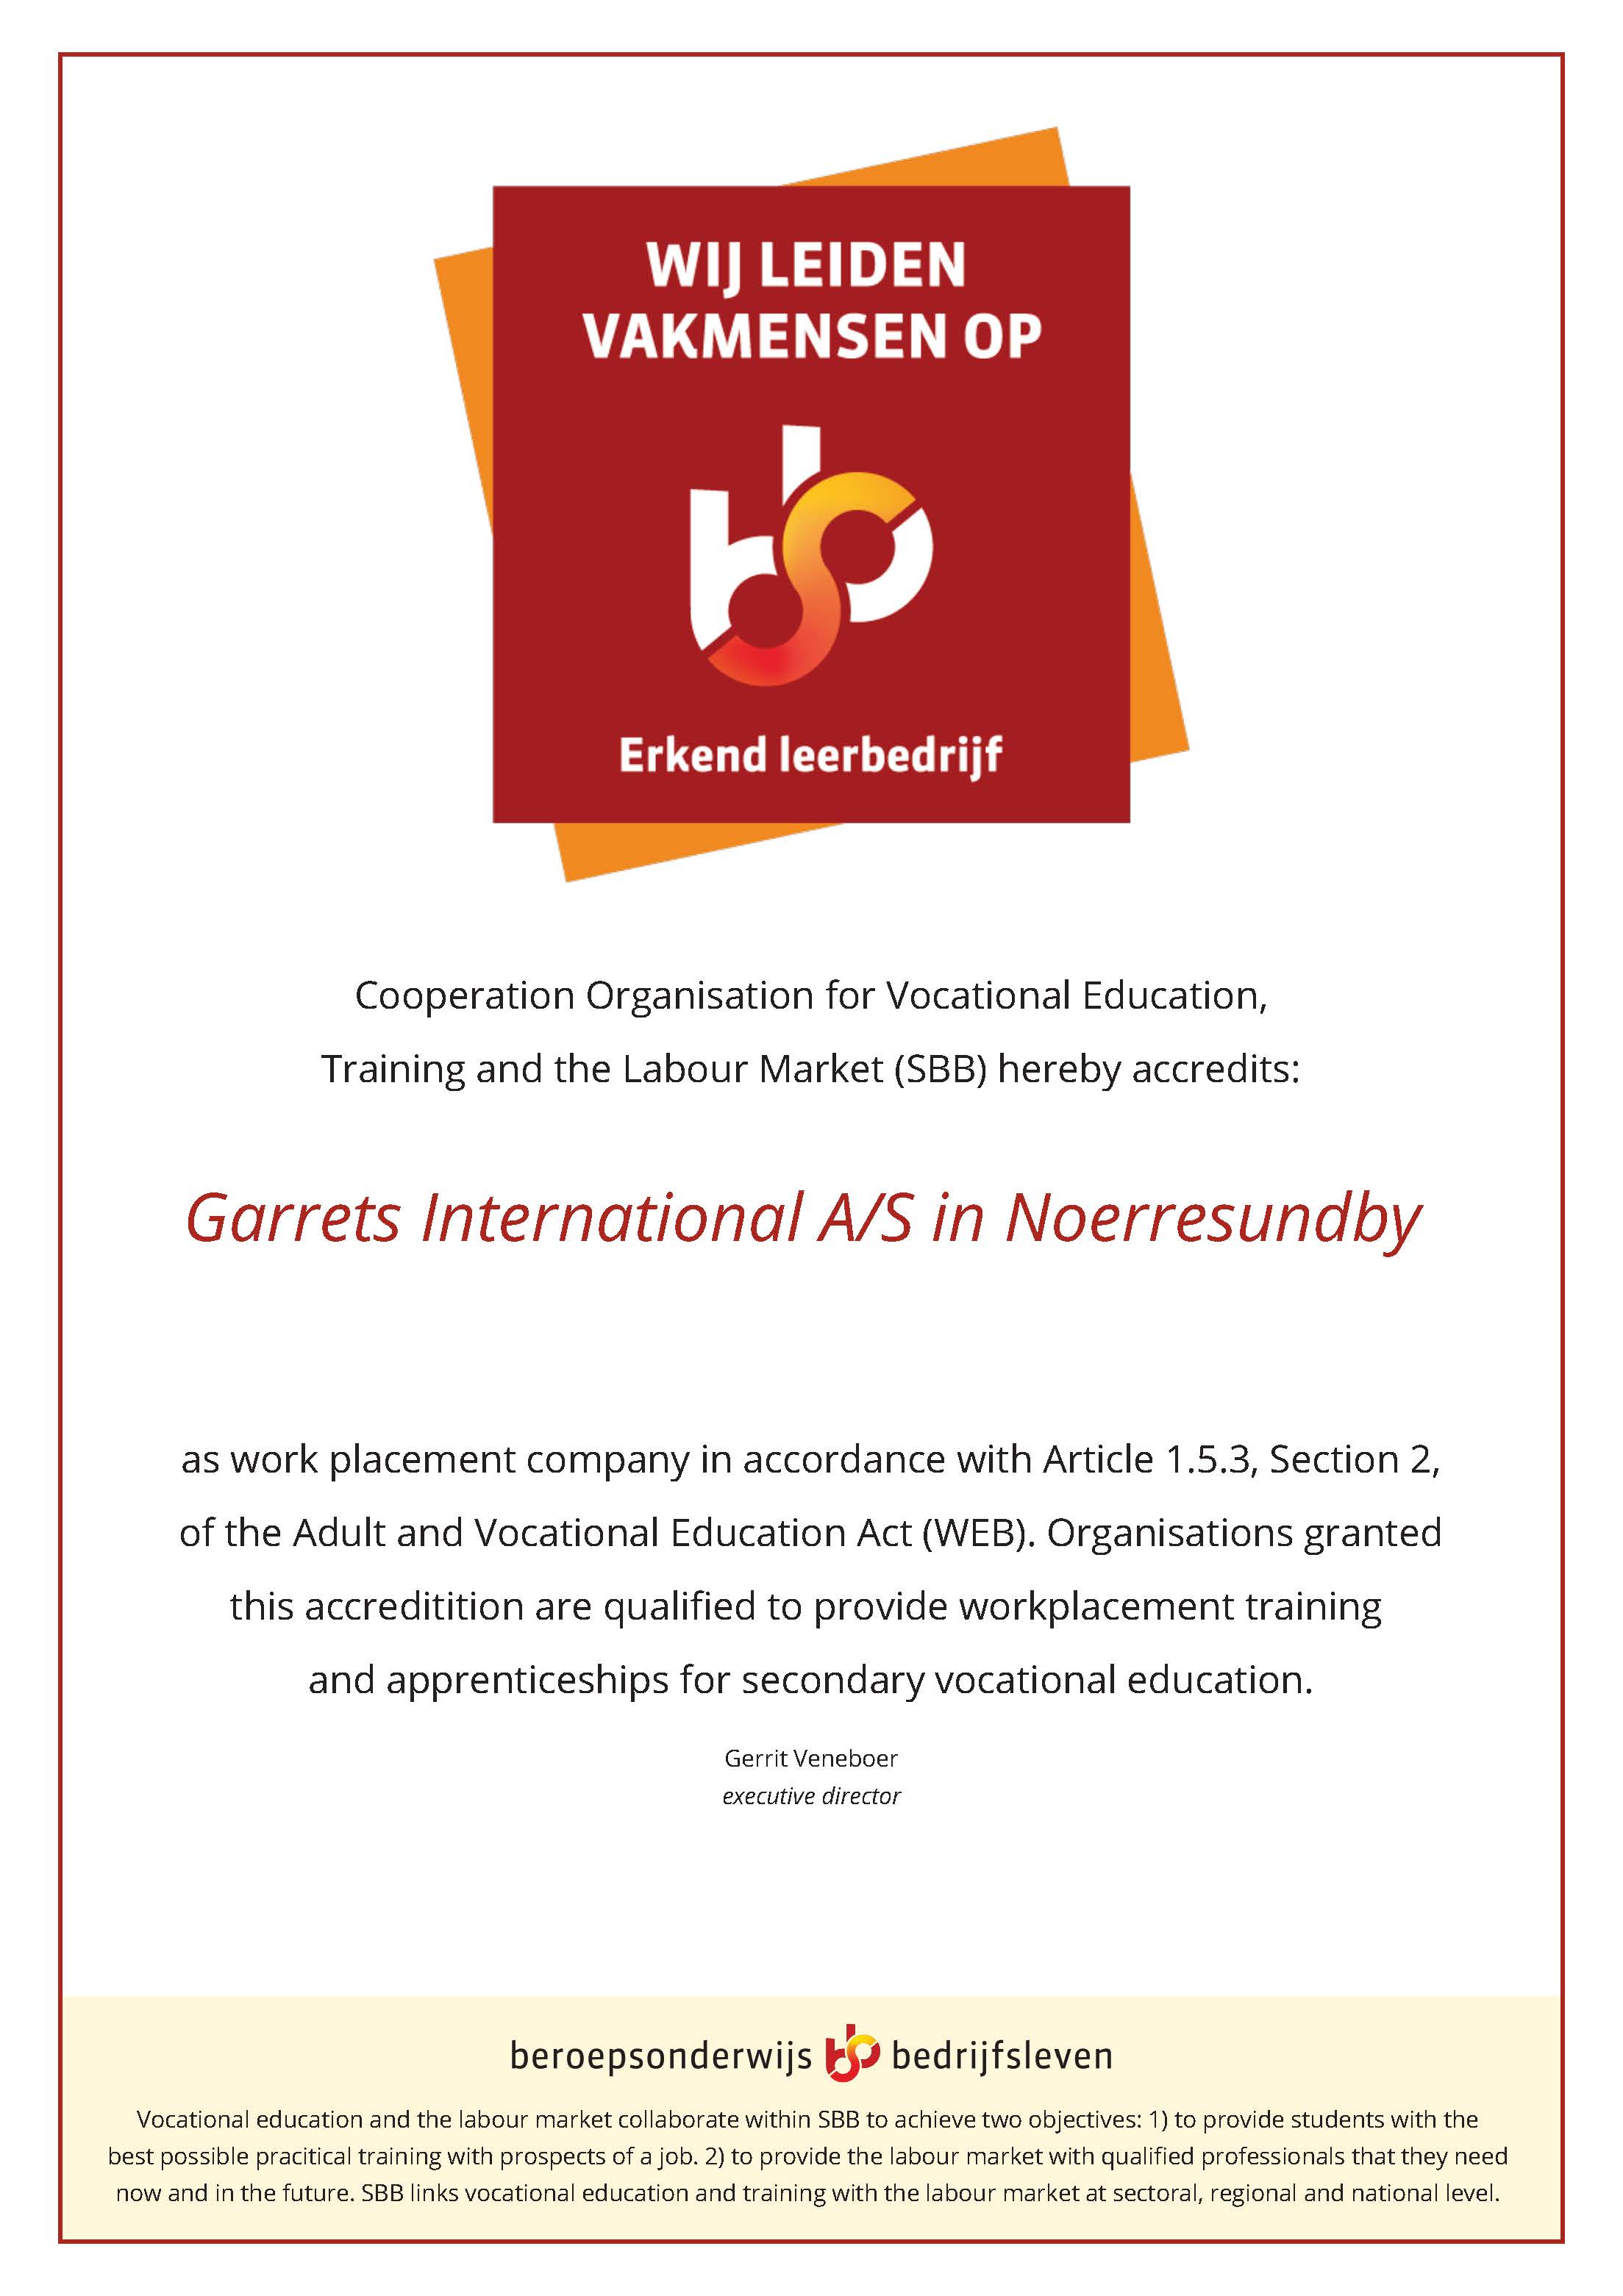 SBB Accreditation. The text reads - Cooperation organisation for Vocational Education, Training and the Labour Market (SBB) hereby accredits Garrets International A/S in Noerresundby as work placement company in accordance with Article 1.5.3 Section 2, of the Adult and Vocational Education (WEB). Organisations granted this accredication are qualified to provide workplacement training and apprecenships for secondary vocational education. spares logistics - ship propel delivery - freight forwarding - cargo